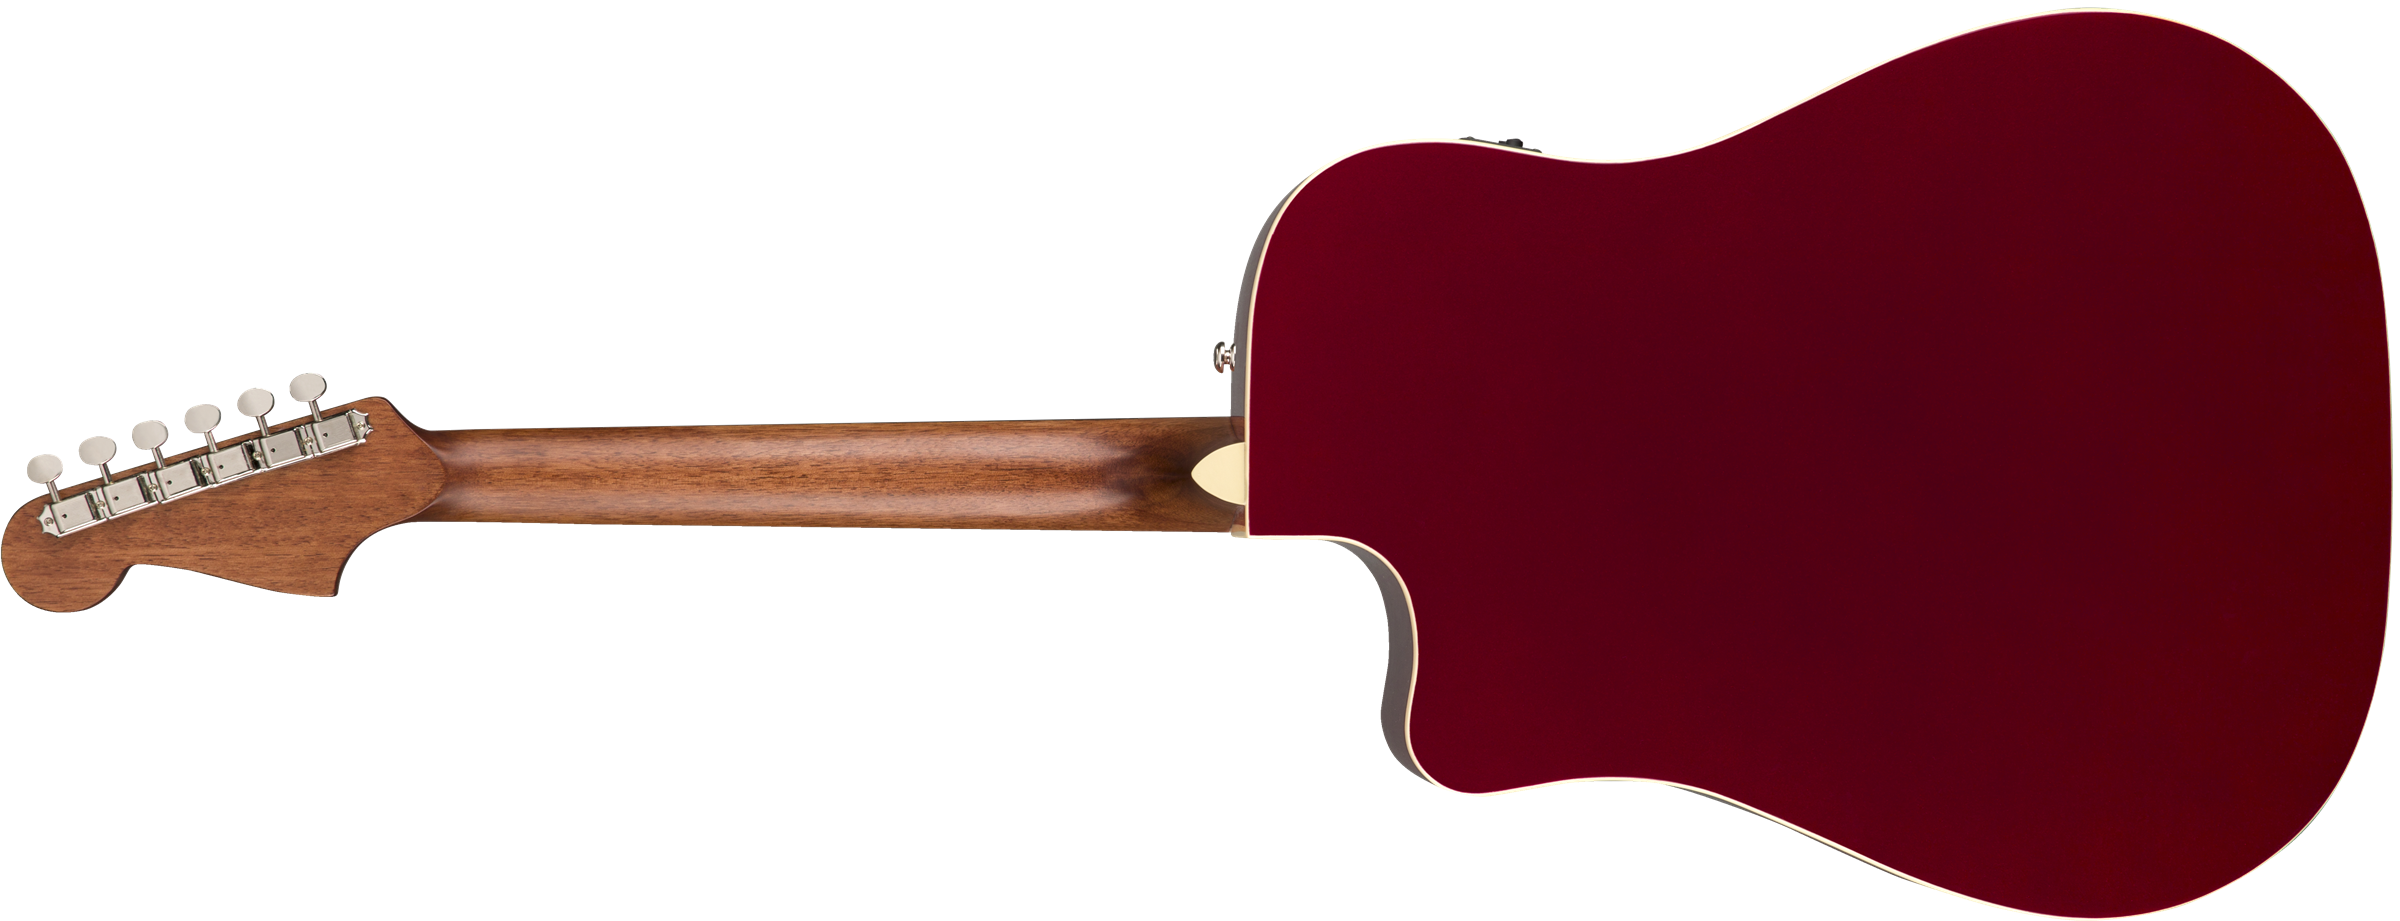 Fender Redondo Player - Candy Apple Red - Guitare Acoustique - Variation 6